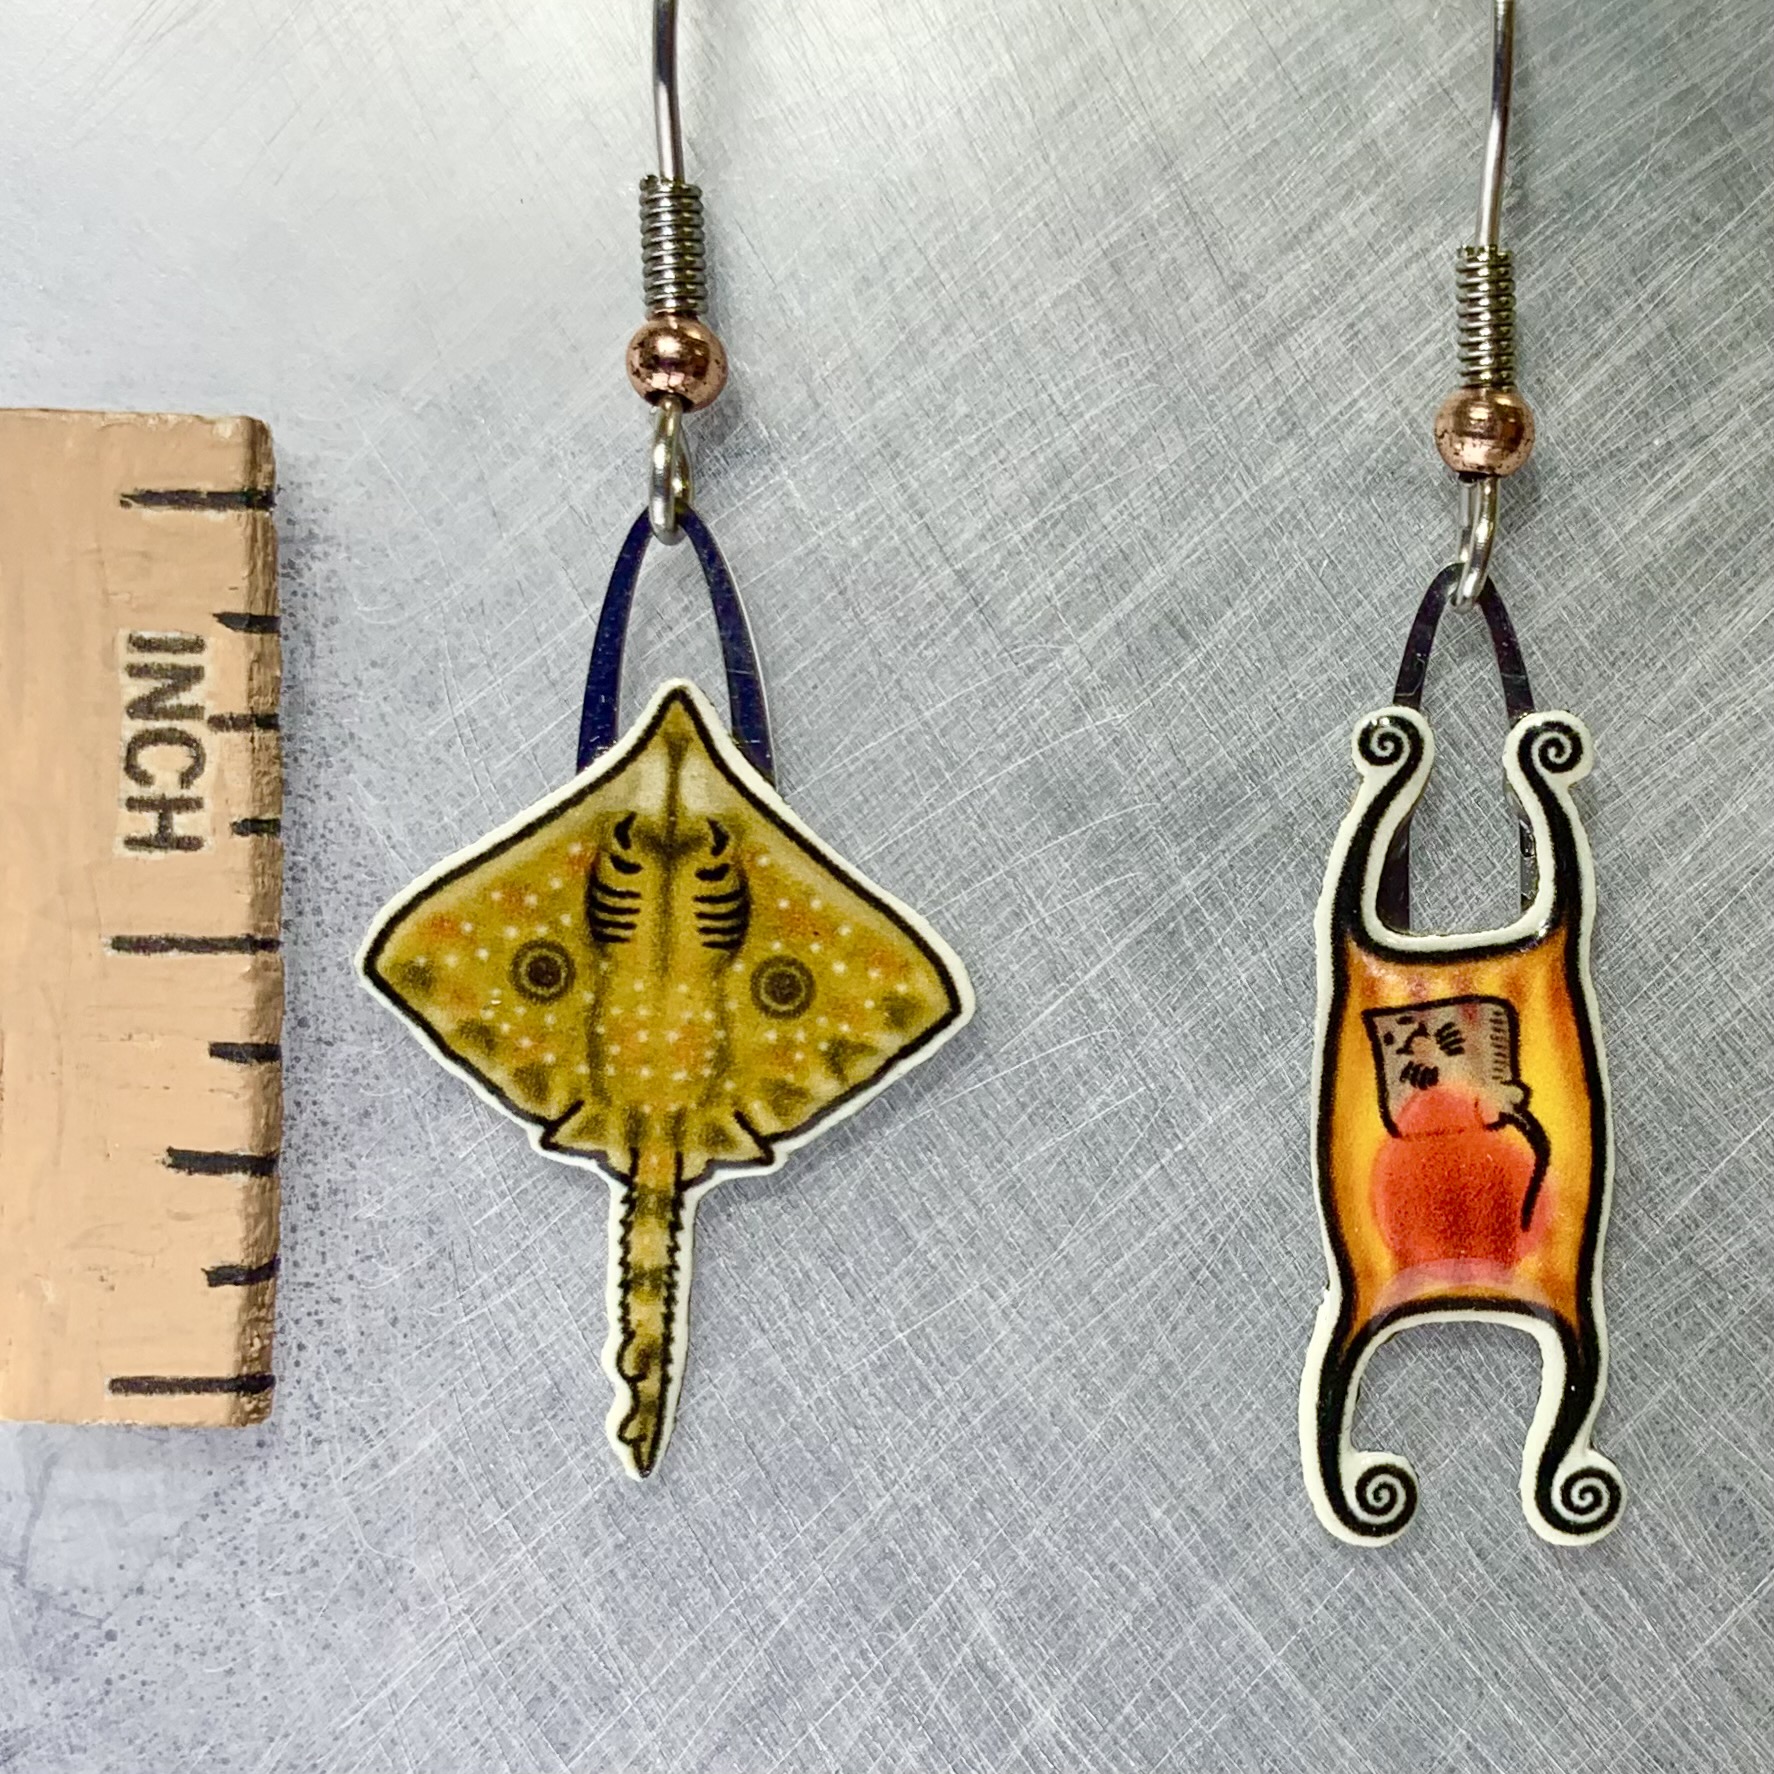 Picture shown is of 1 inch tall pair of earrings of the marine animal the Skate.